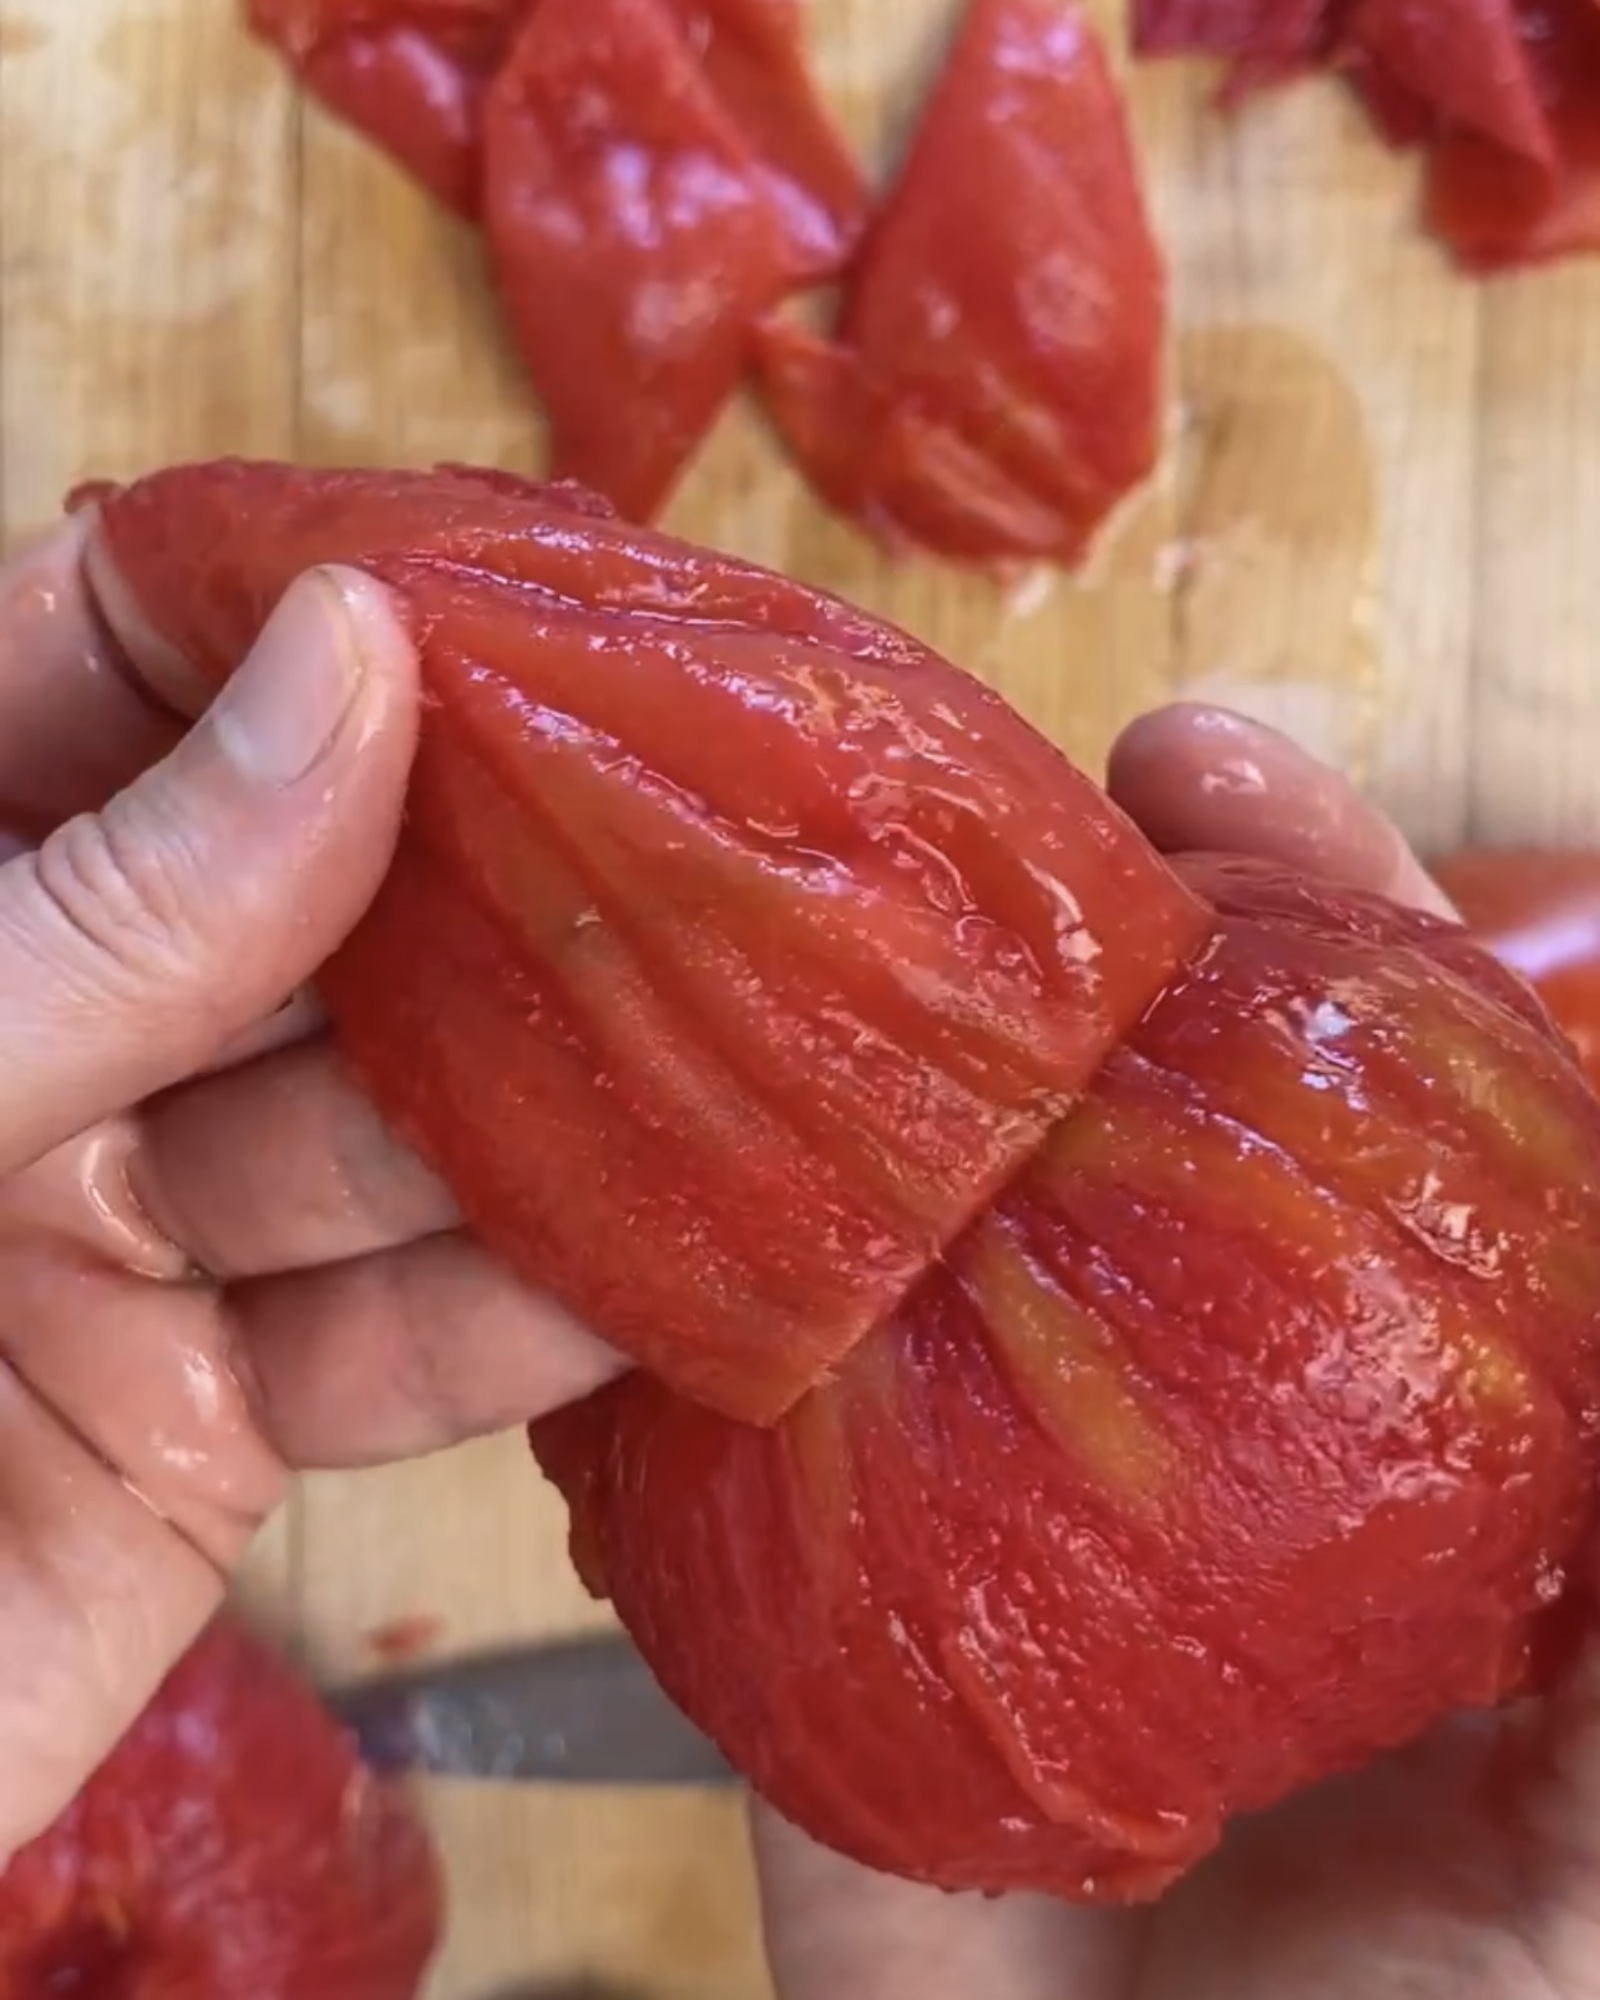 A hand pulls the skin off of a blanched tomato